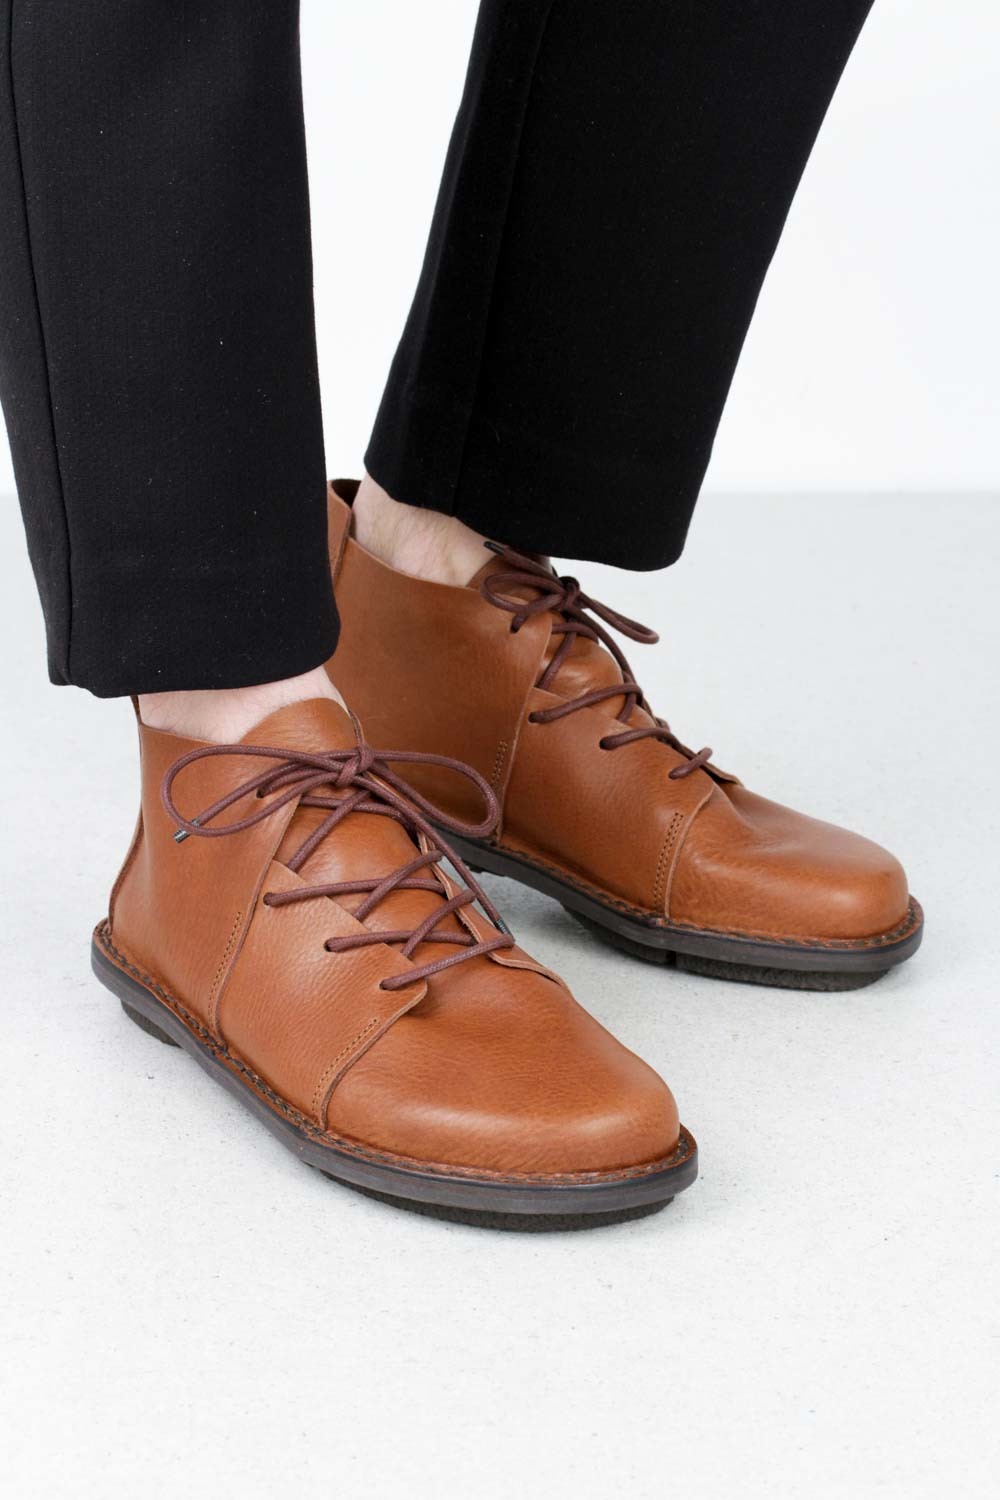 Nomad m - Trippen shoes - exceptional design and quality from Germany